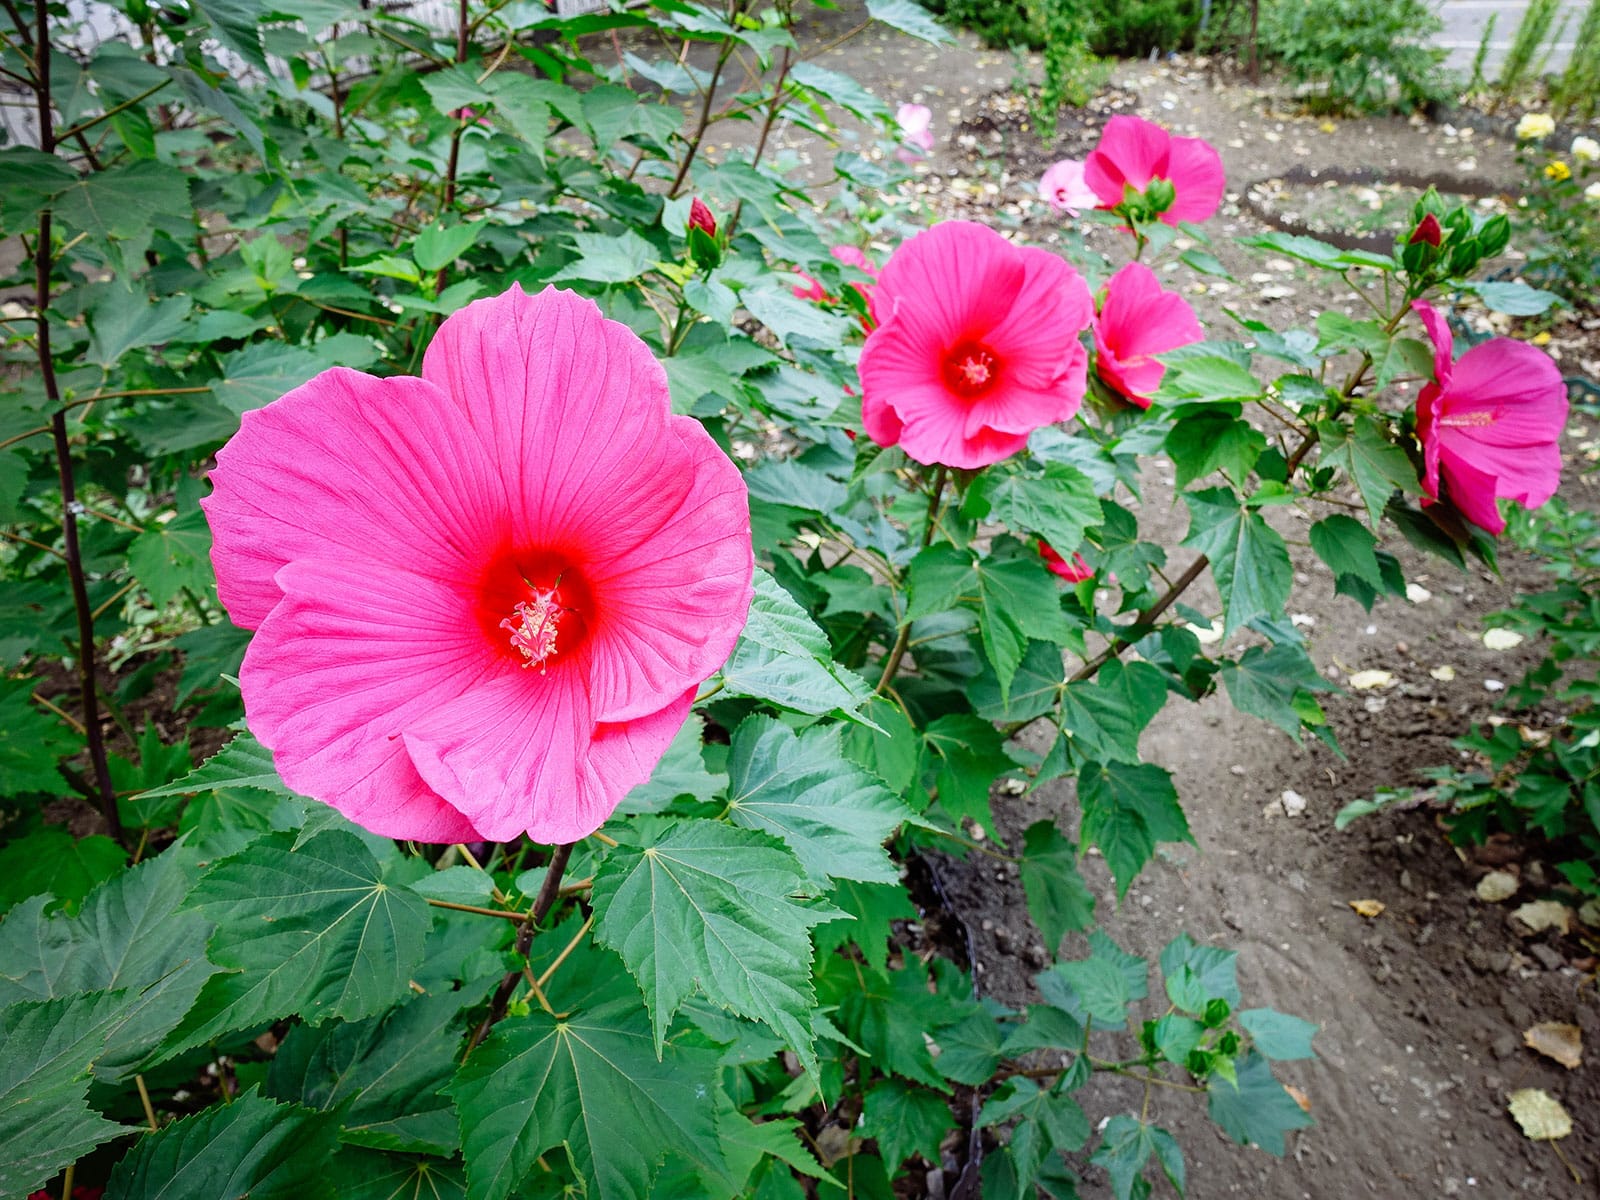 Hardy hibiscus shrub in bloom in a garden with bright pink flowers